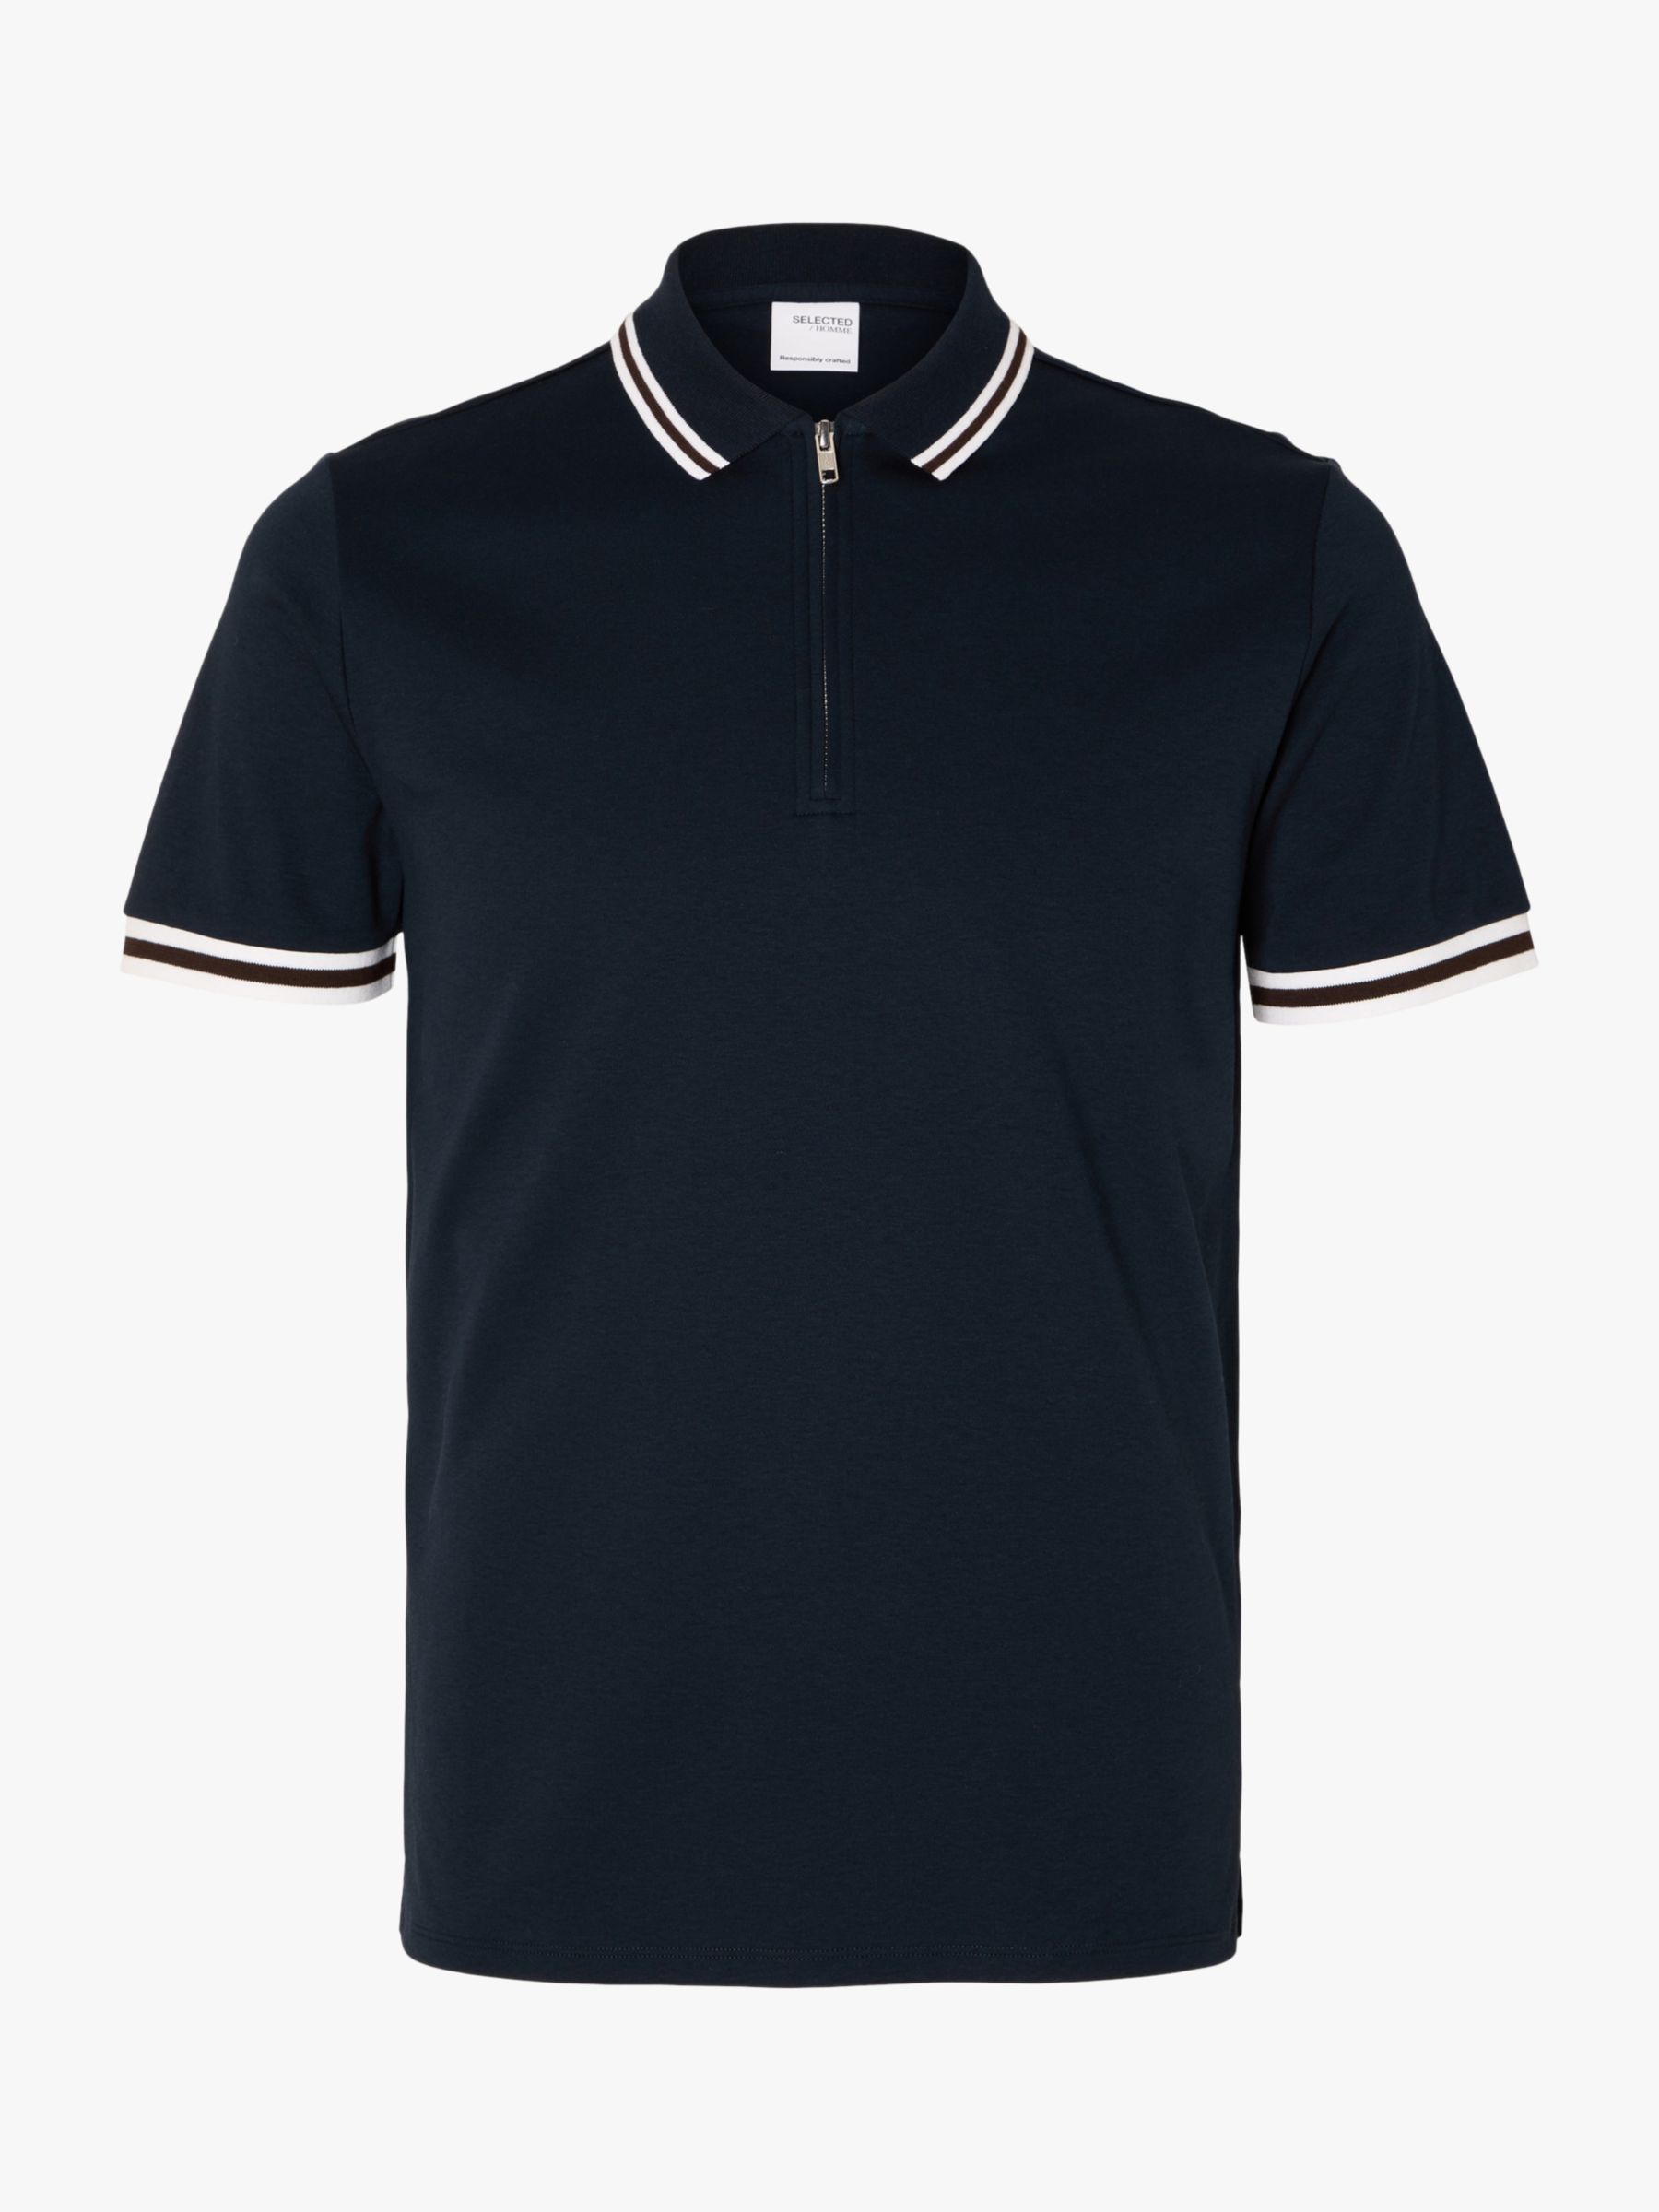 SELECTED HOMME Toulouse Short Sleeve Polo Shirt, Navy, S